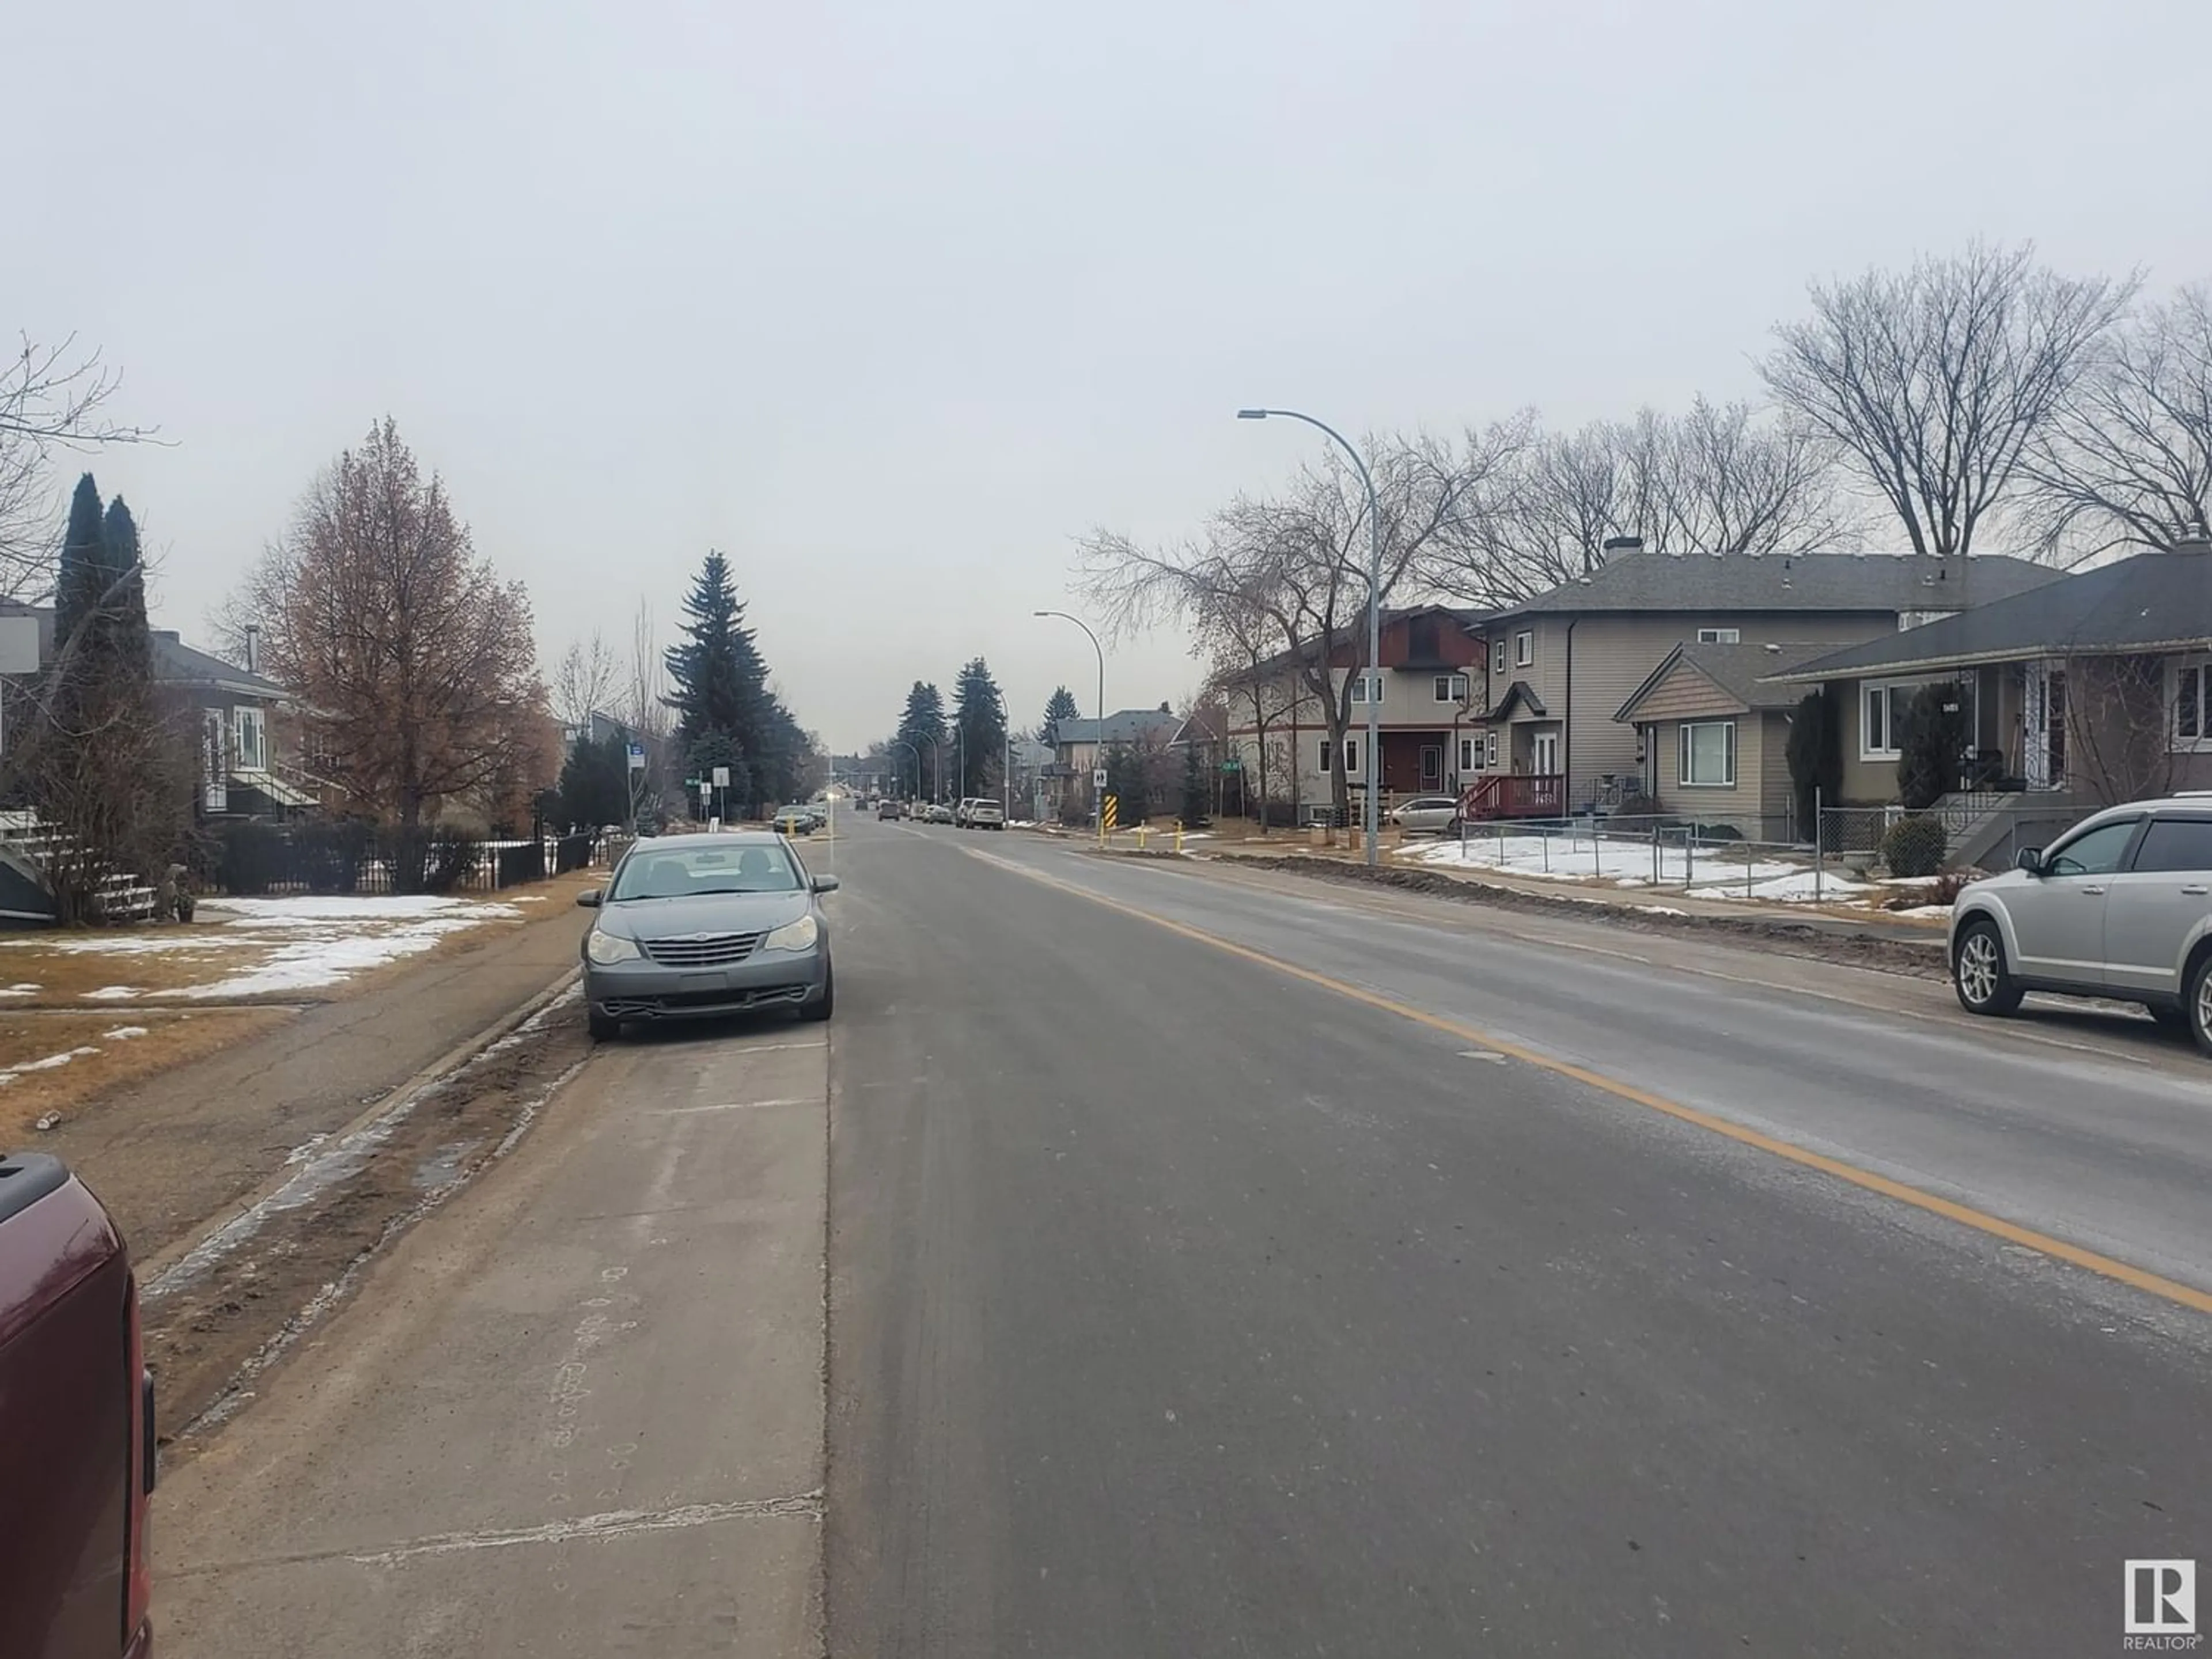 A view of a street for 10532 79 ST NW, Edmonton Alberta T6A3H3